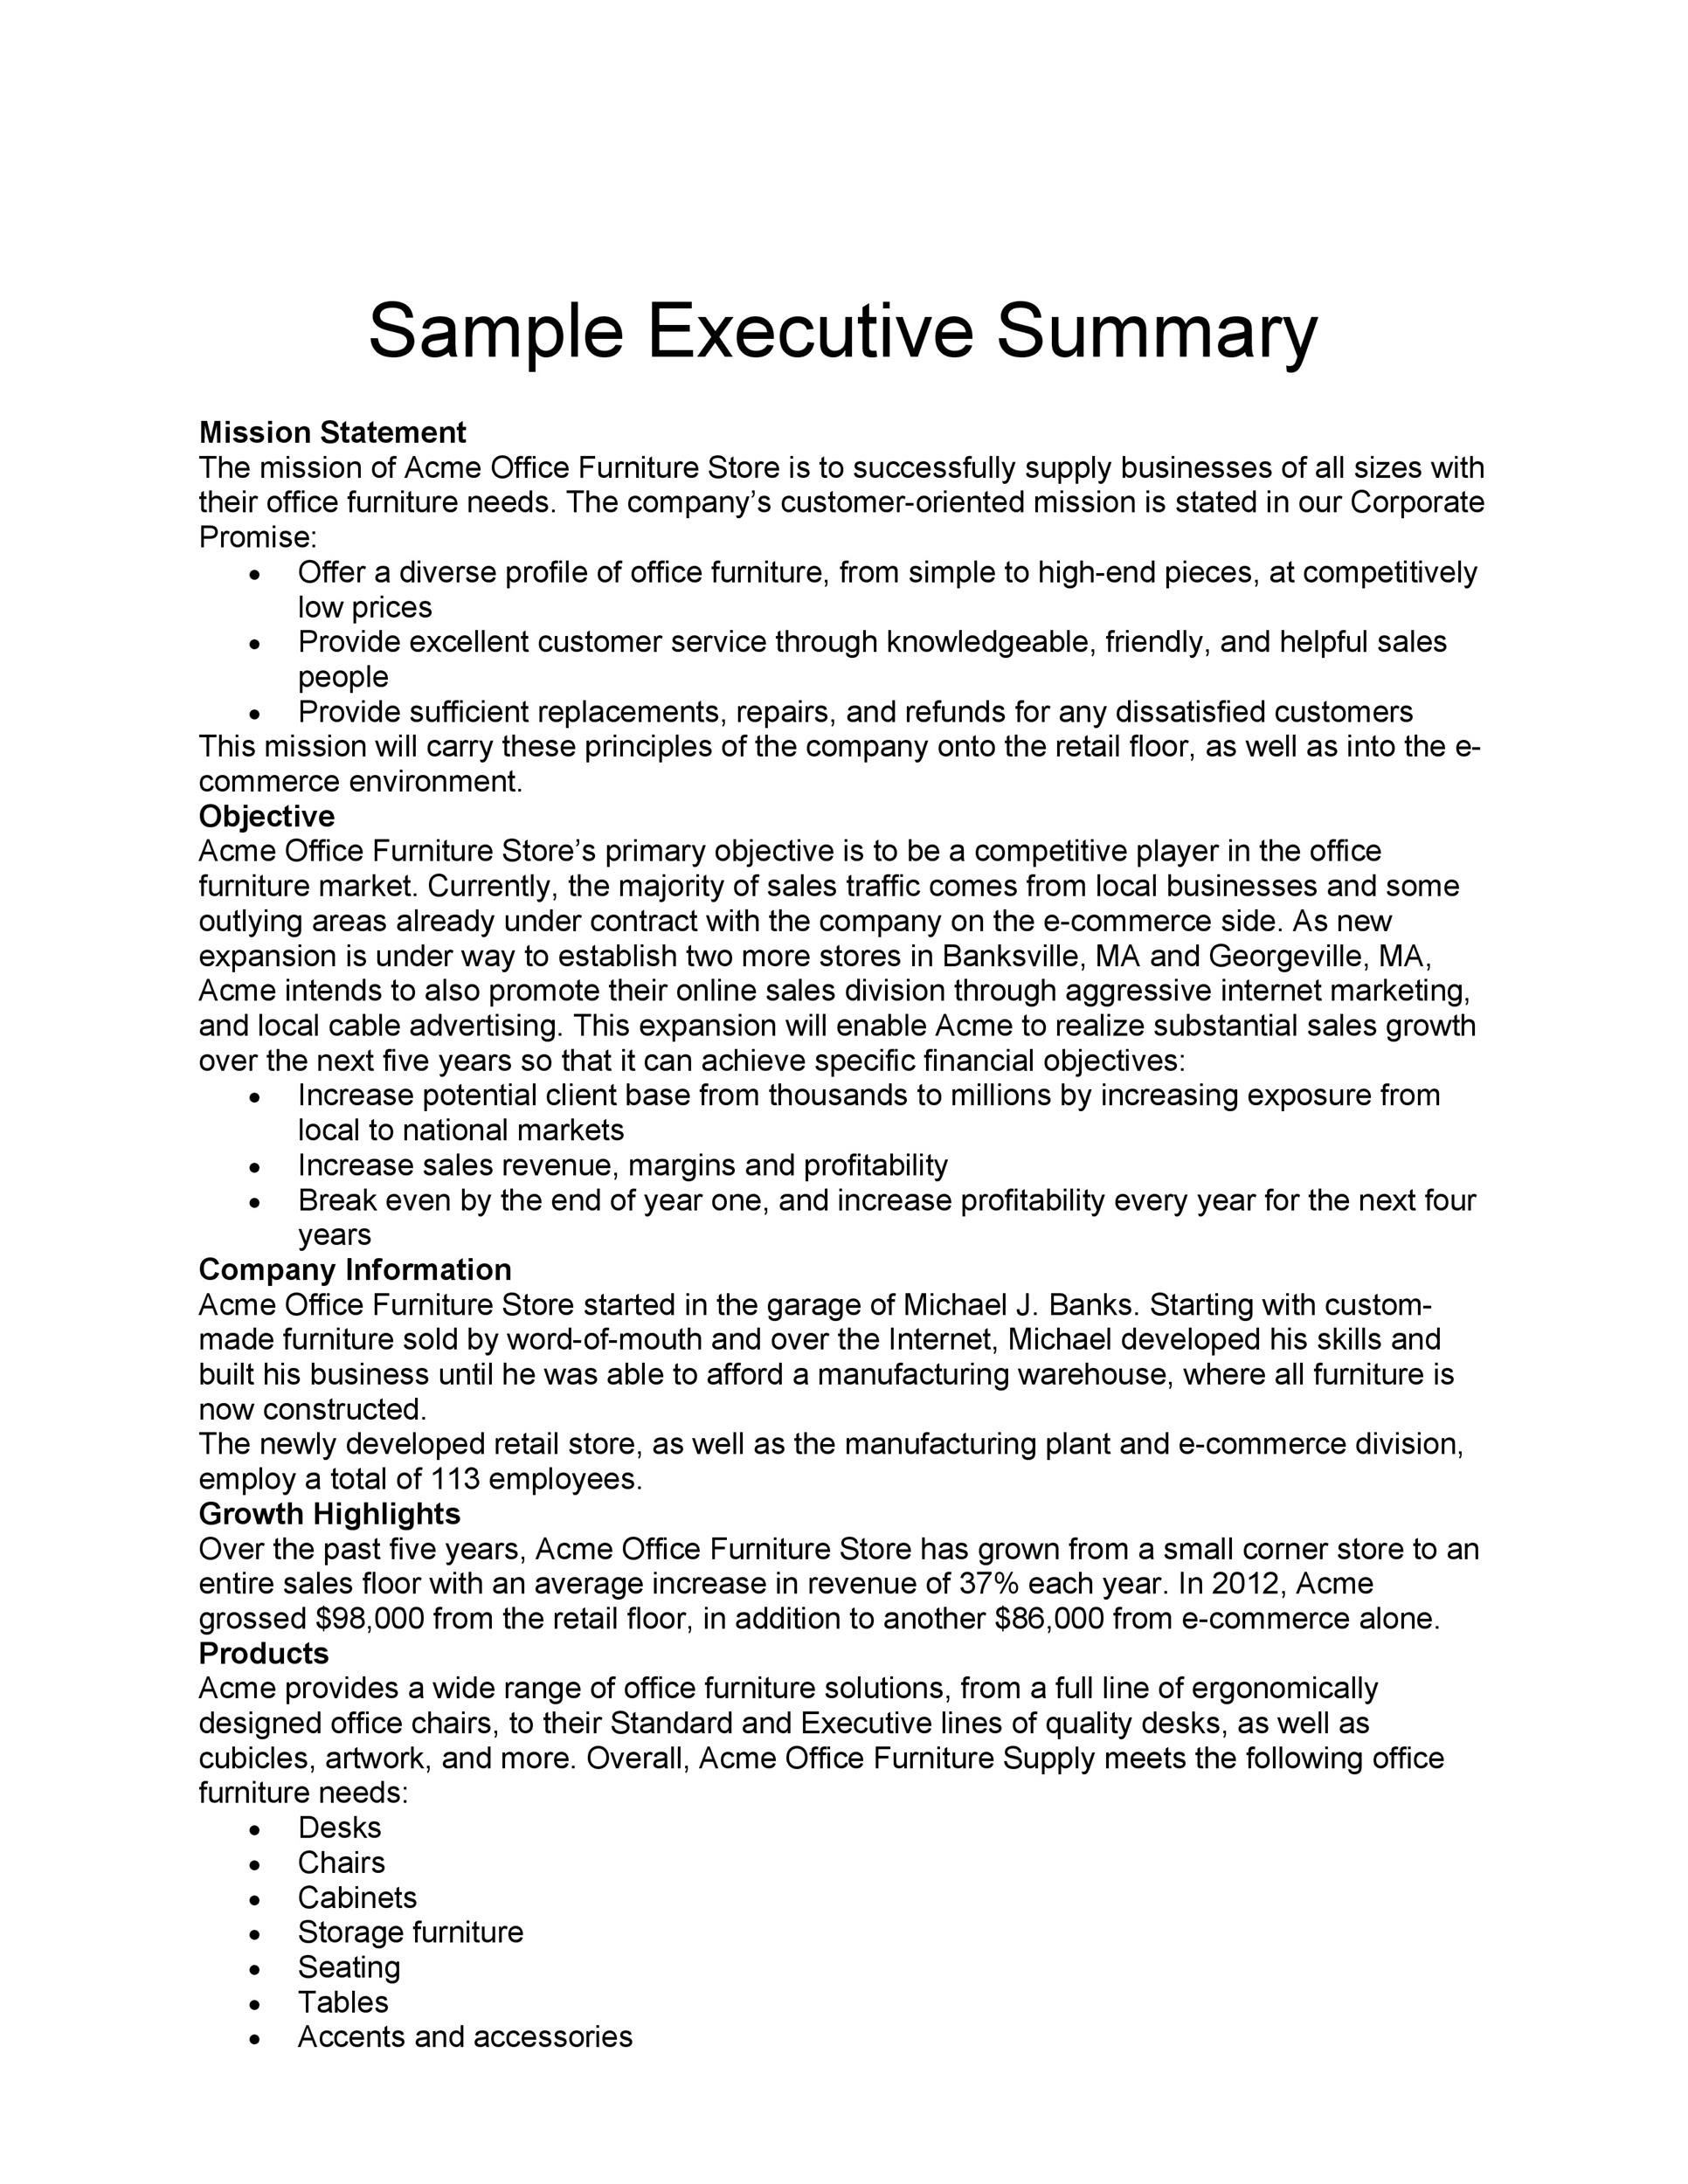 Organizing Your Social Sciences Research Paper: Executive Summary